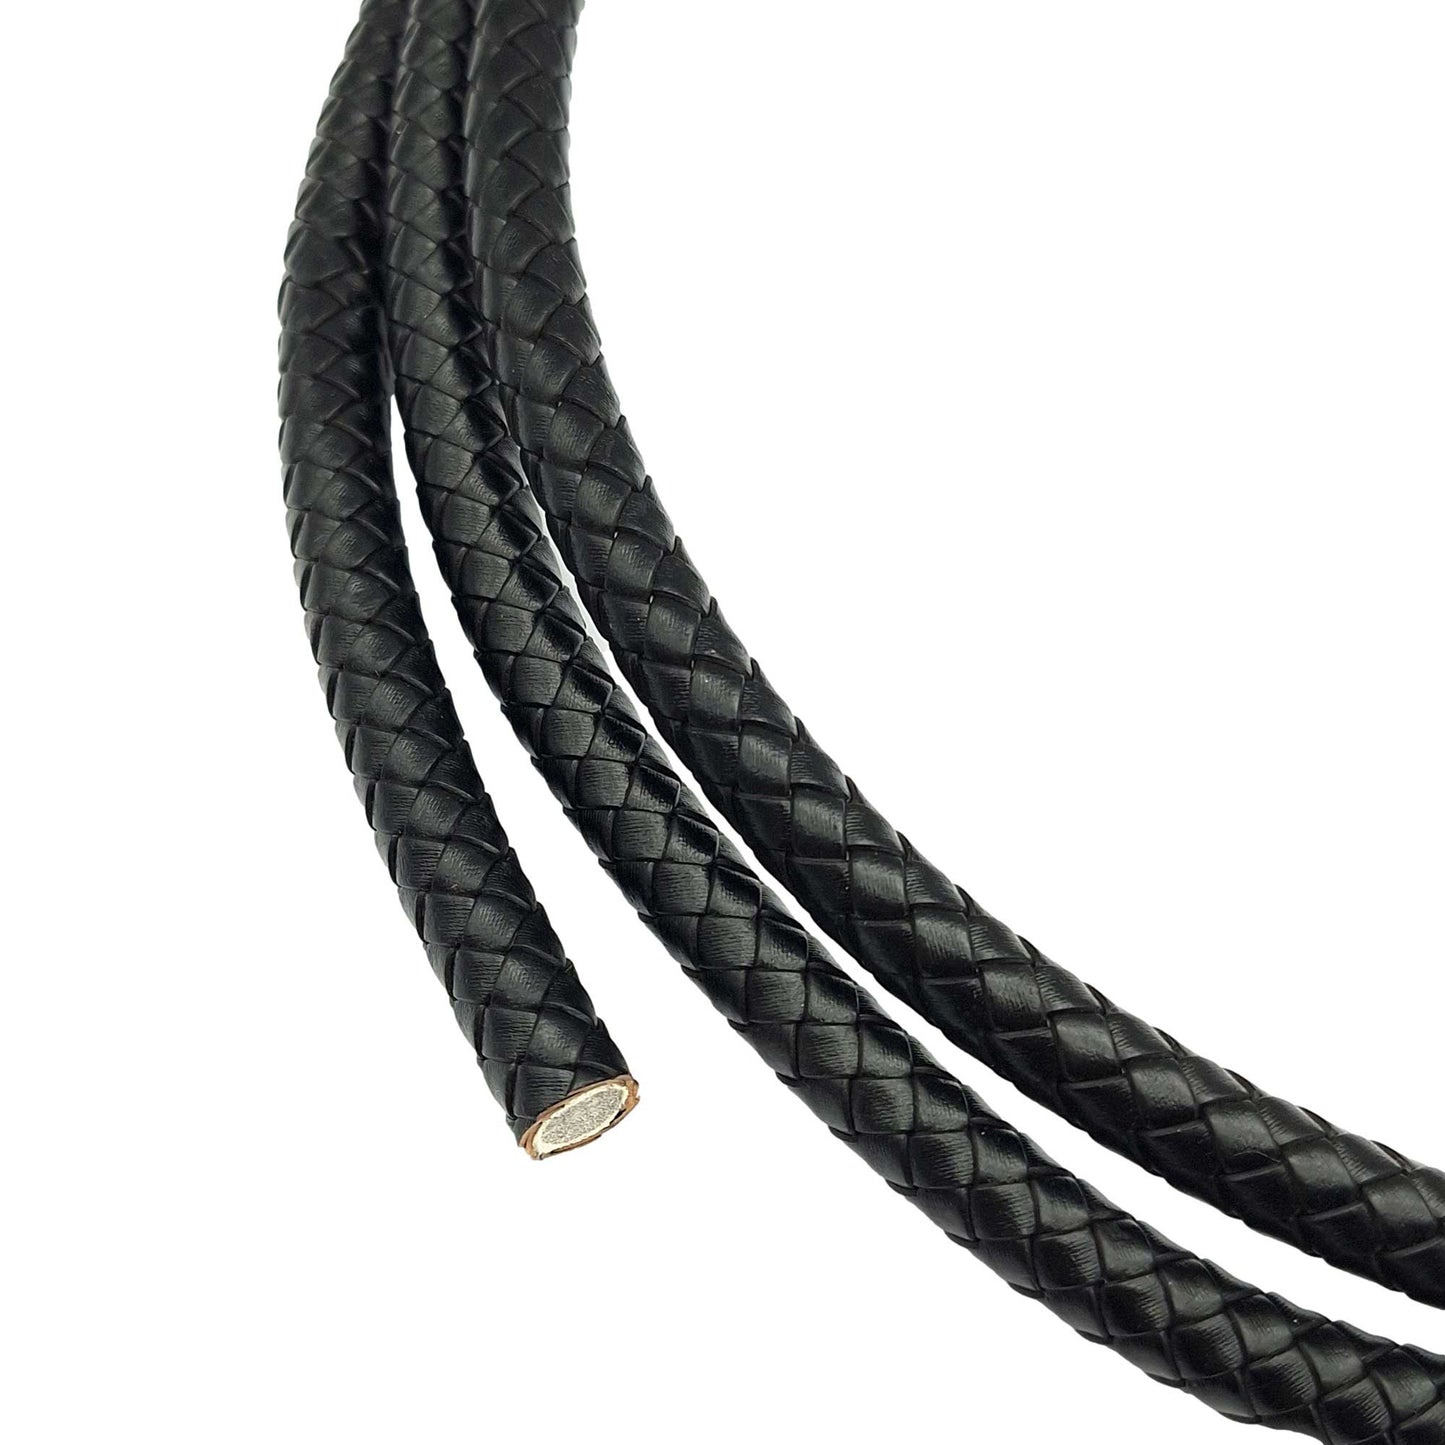 ShapesbyX 10mm Diameter Braided Leather Bolo Cords Black Jewelry Making Leather Strap 1cm Round